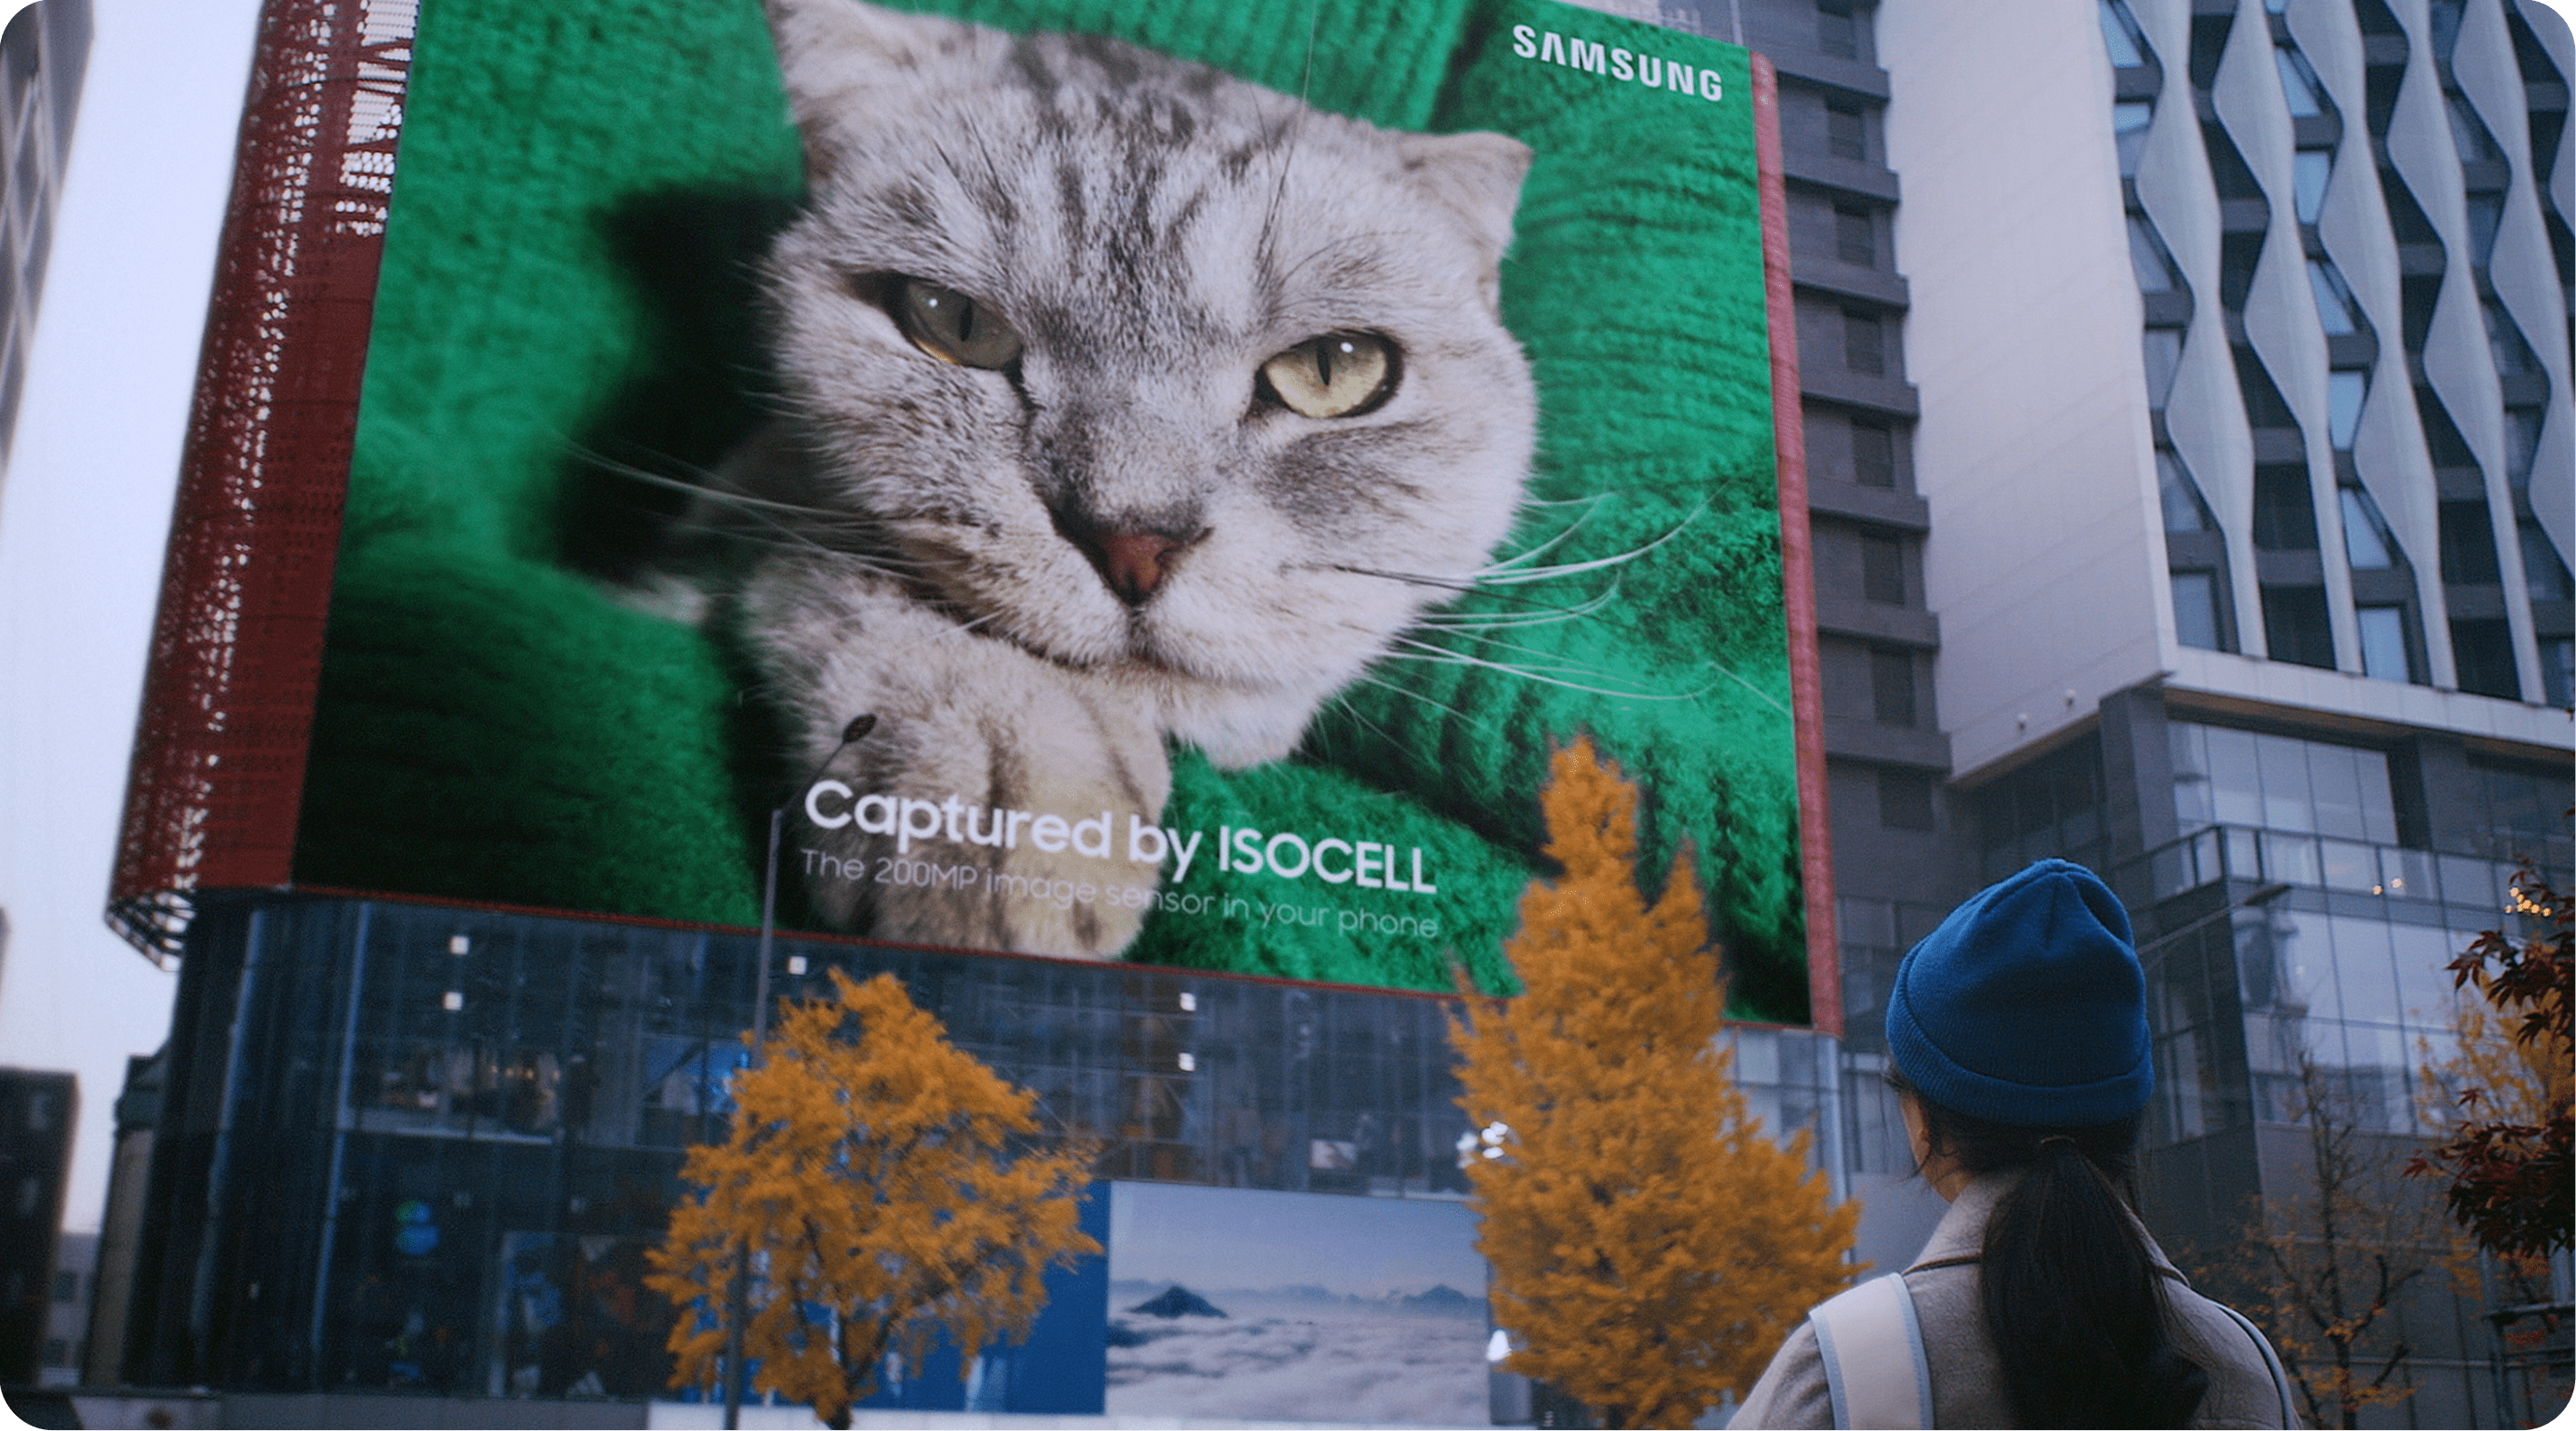 A tremendous cat print made with a 200 megapixel Samsung ISOCELL image sensor posted on a building